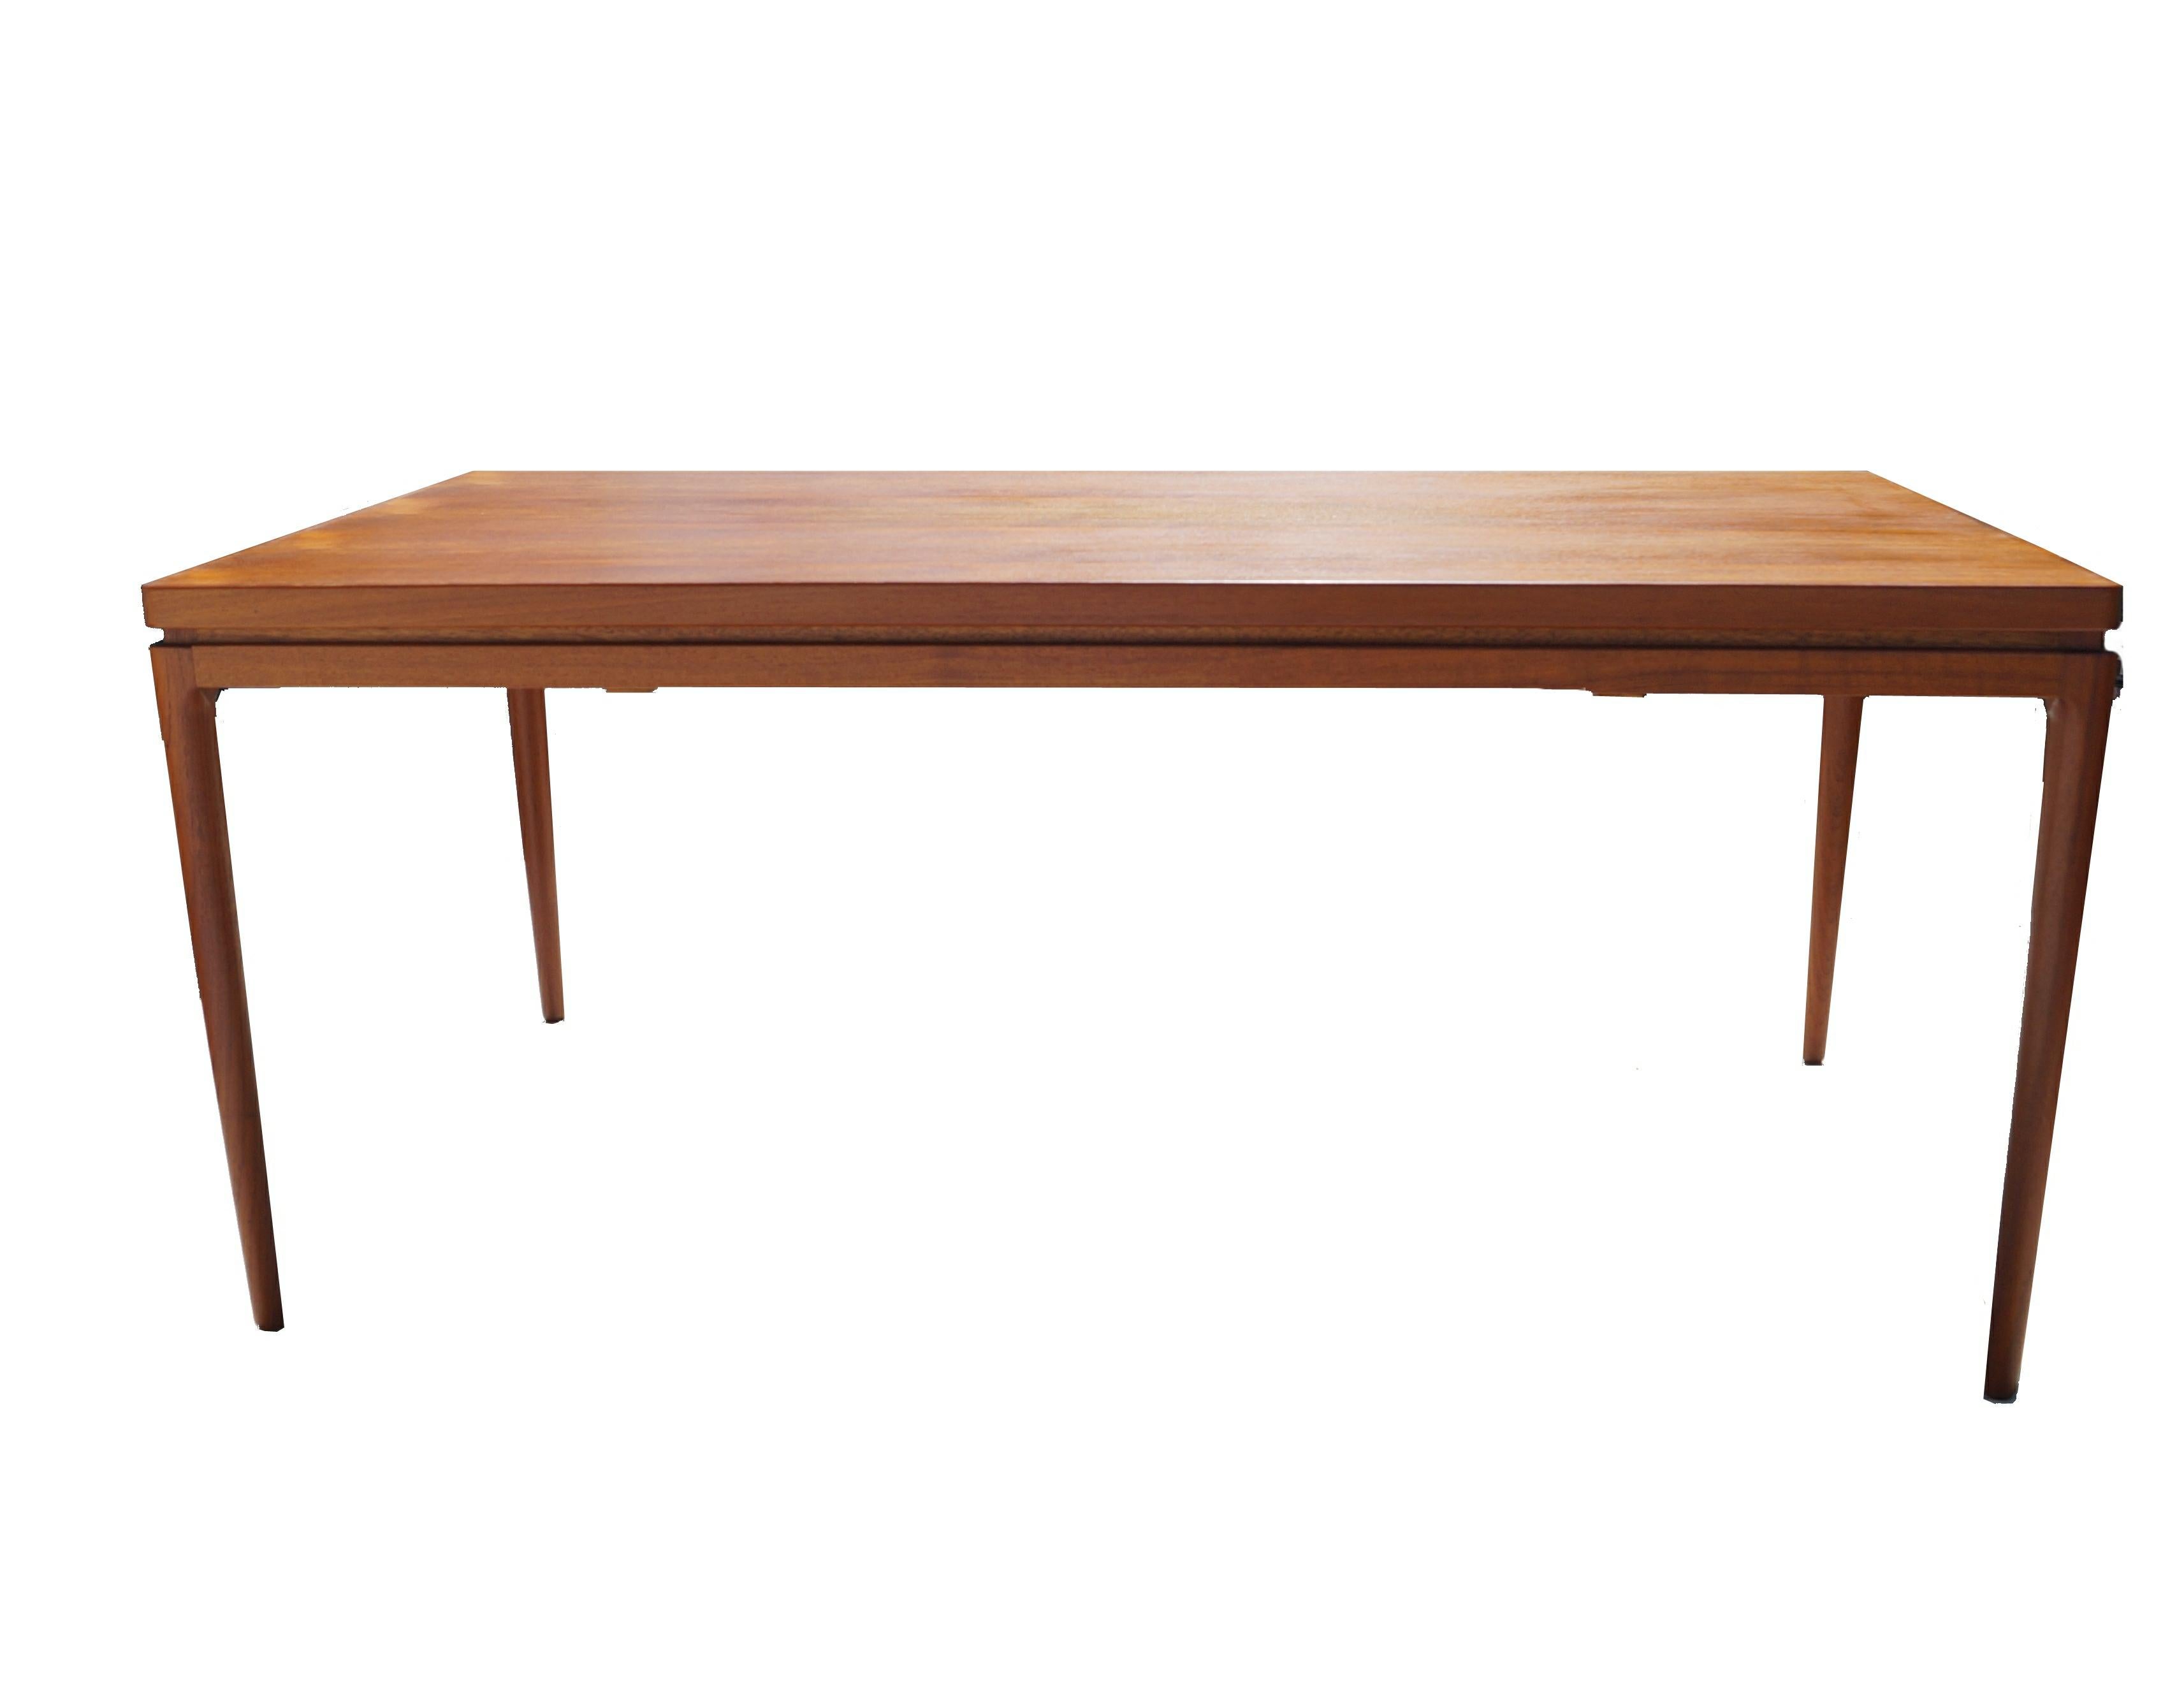 Johannes Andersen for Christian Linneberg teak dining table. Teak extending dining table with pair of store away extension leaves . You can store the extension leaves underneath the tabletop. It measures 104.50